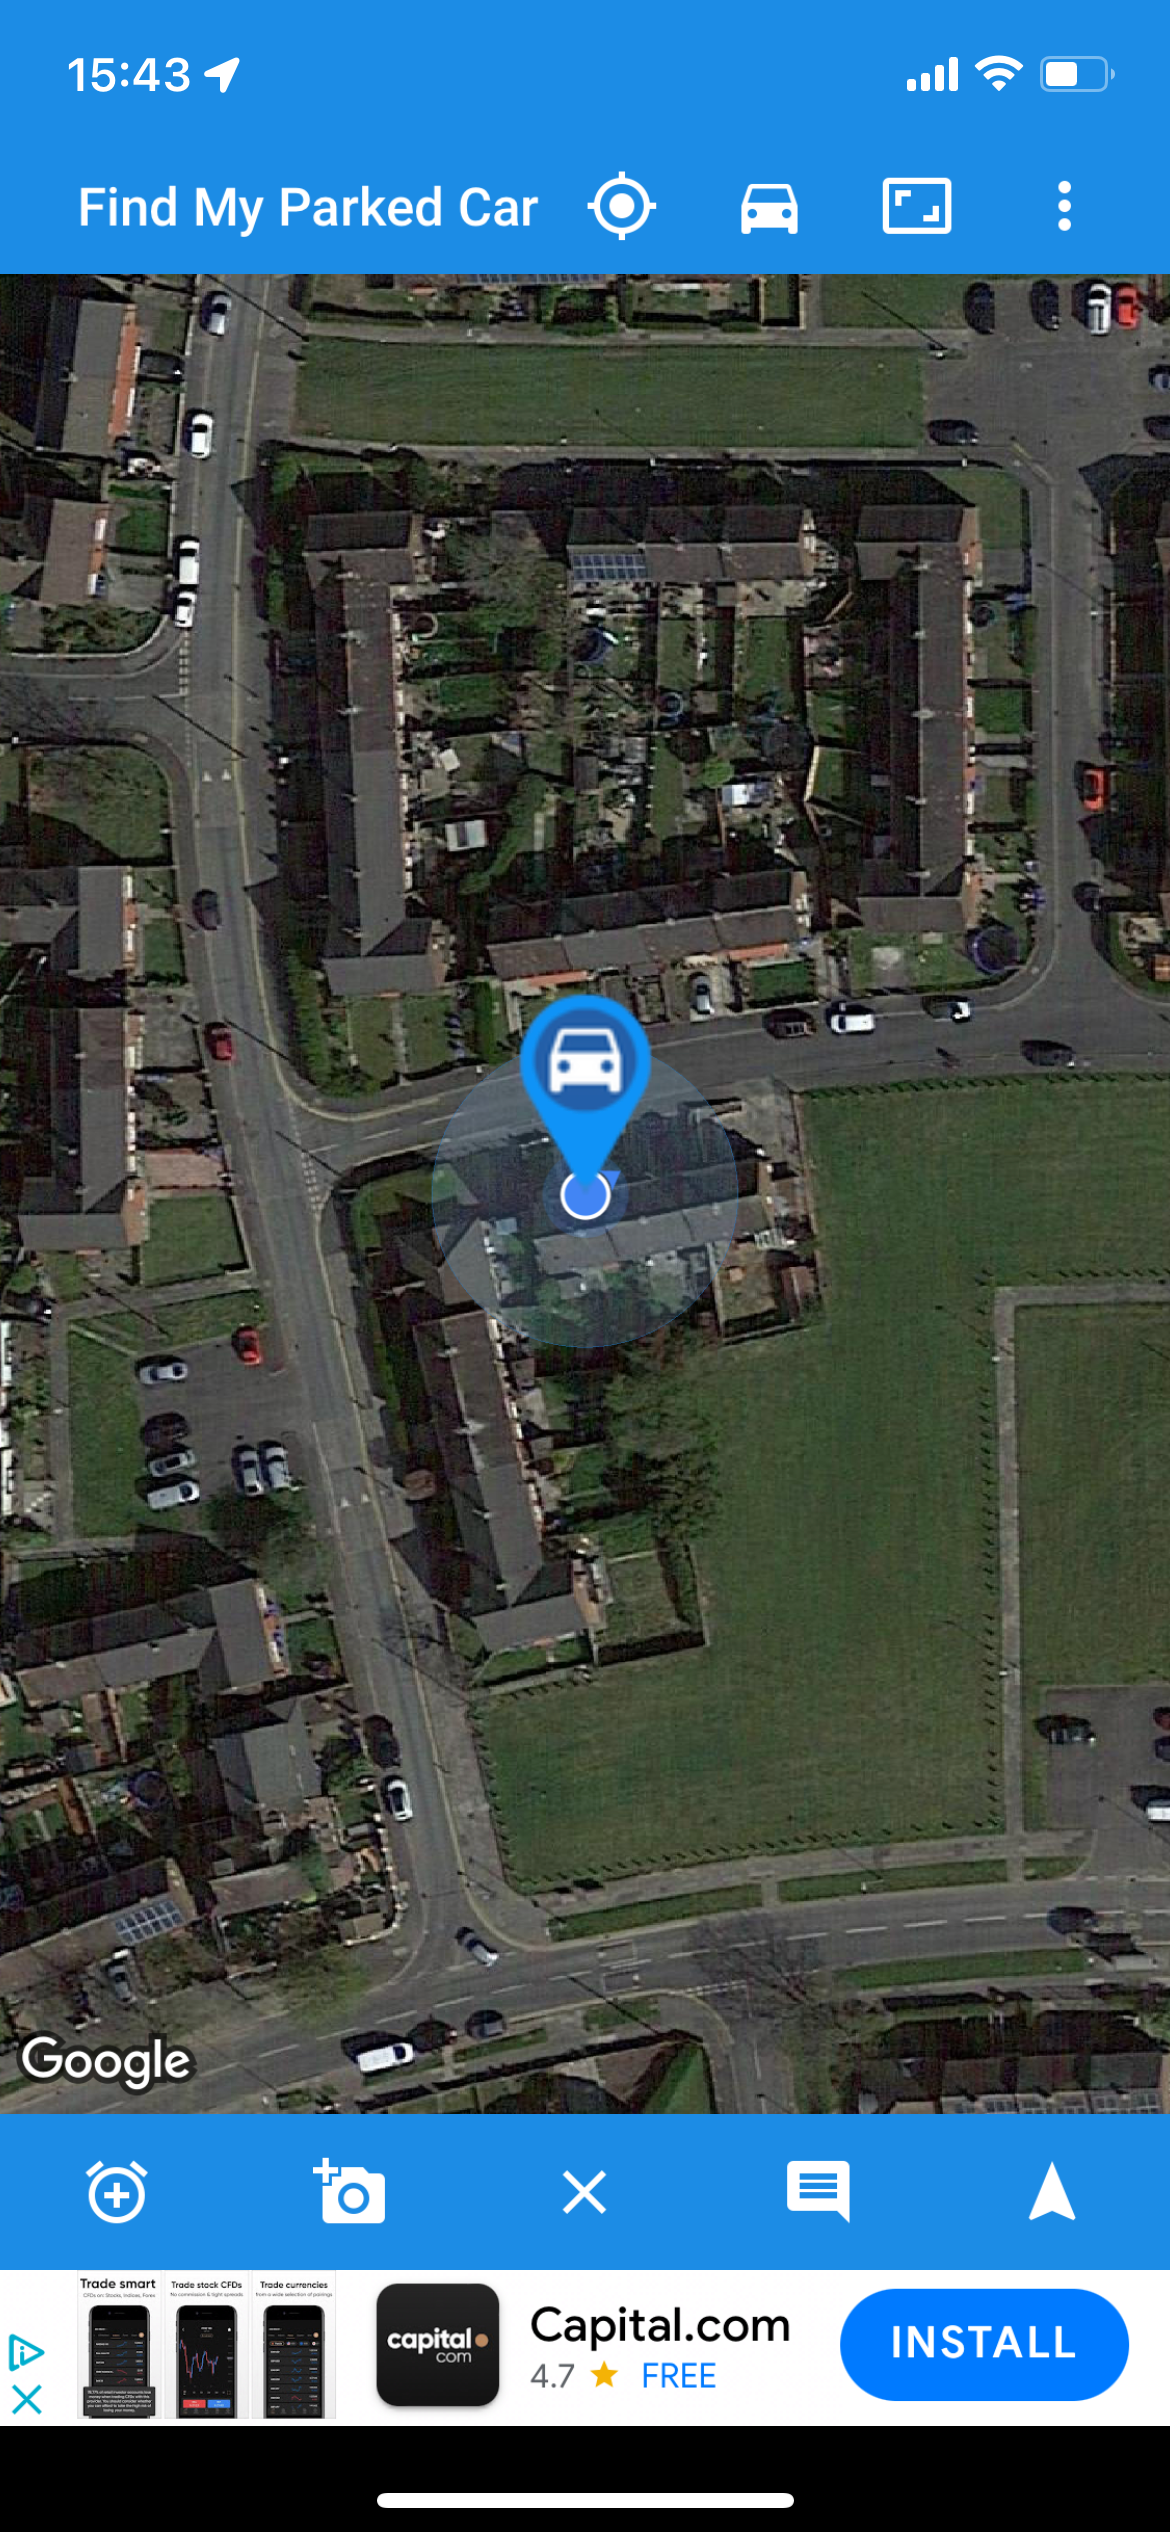 Find my parked car app satellite shot showing car's location